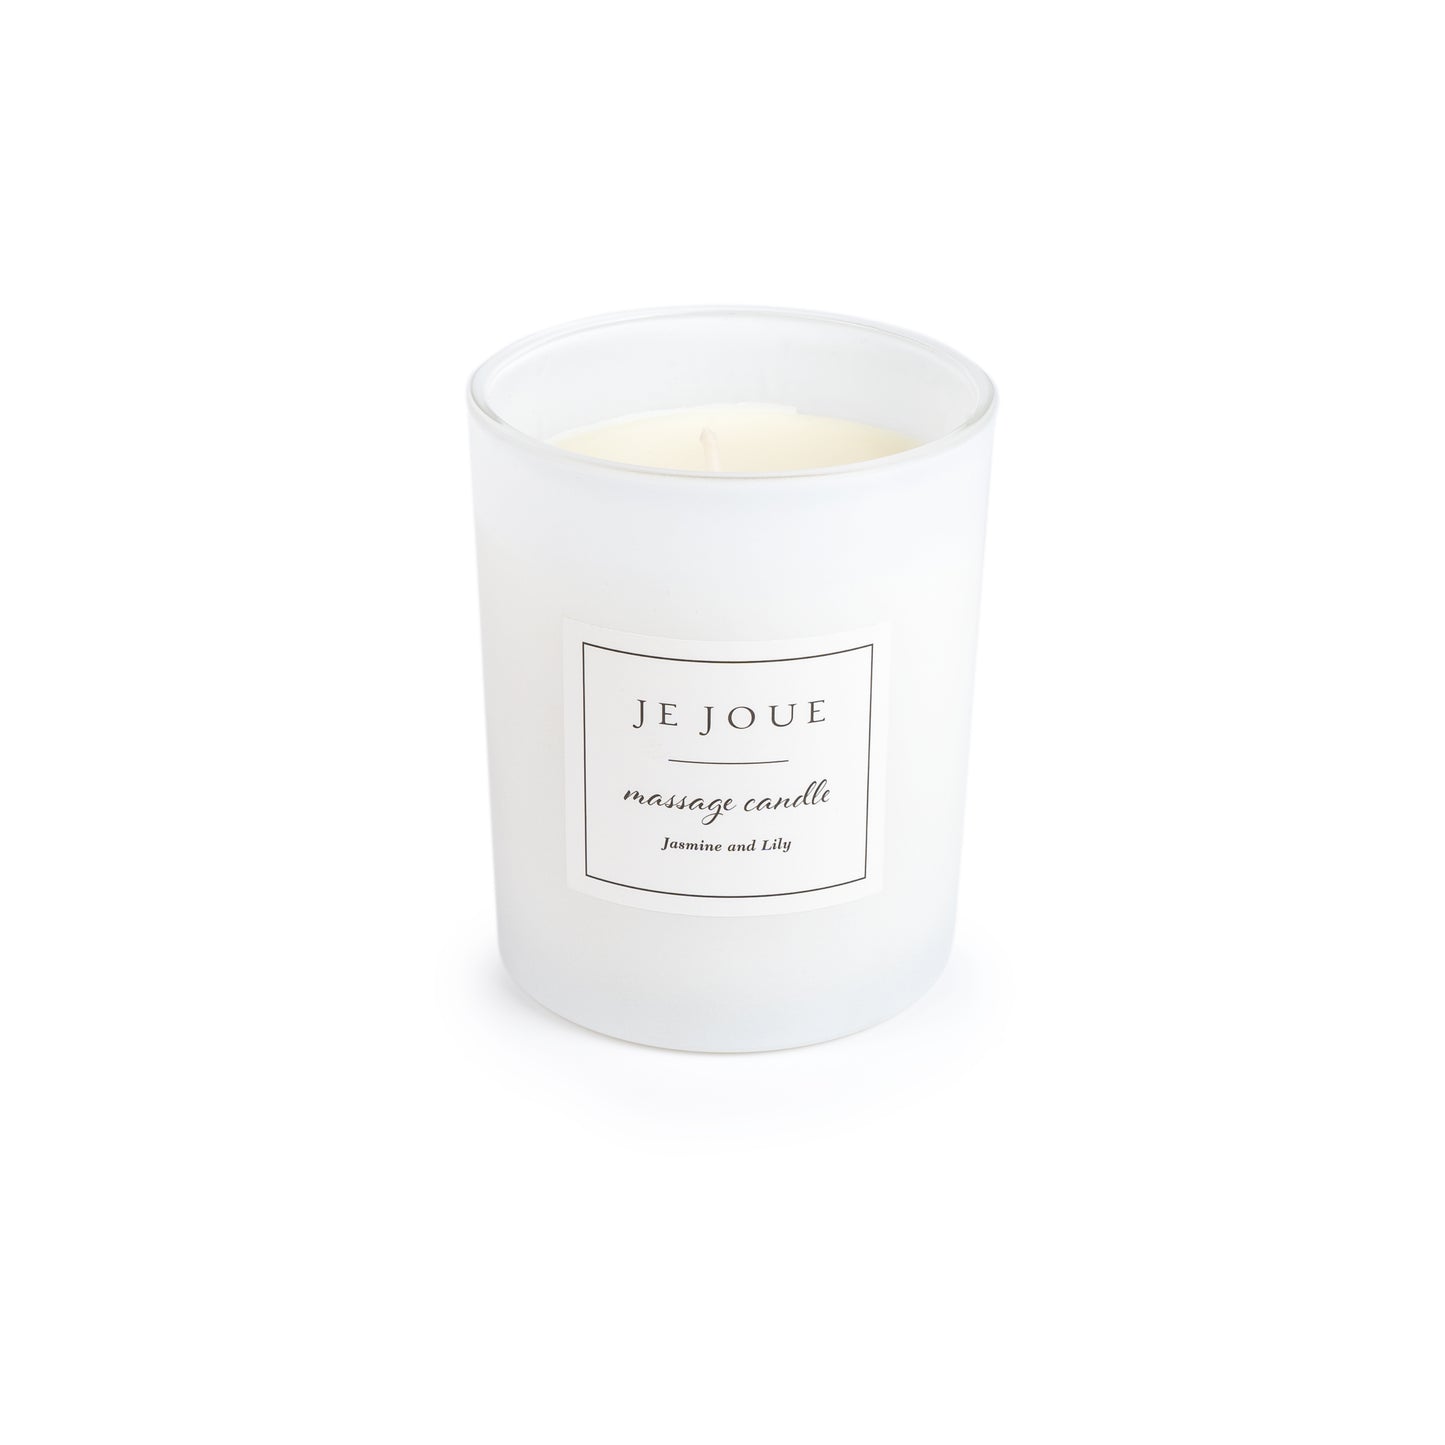 Je Joue Jasmine and Lily Massage Candle